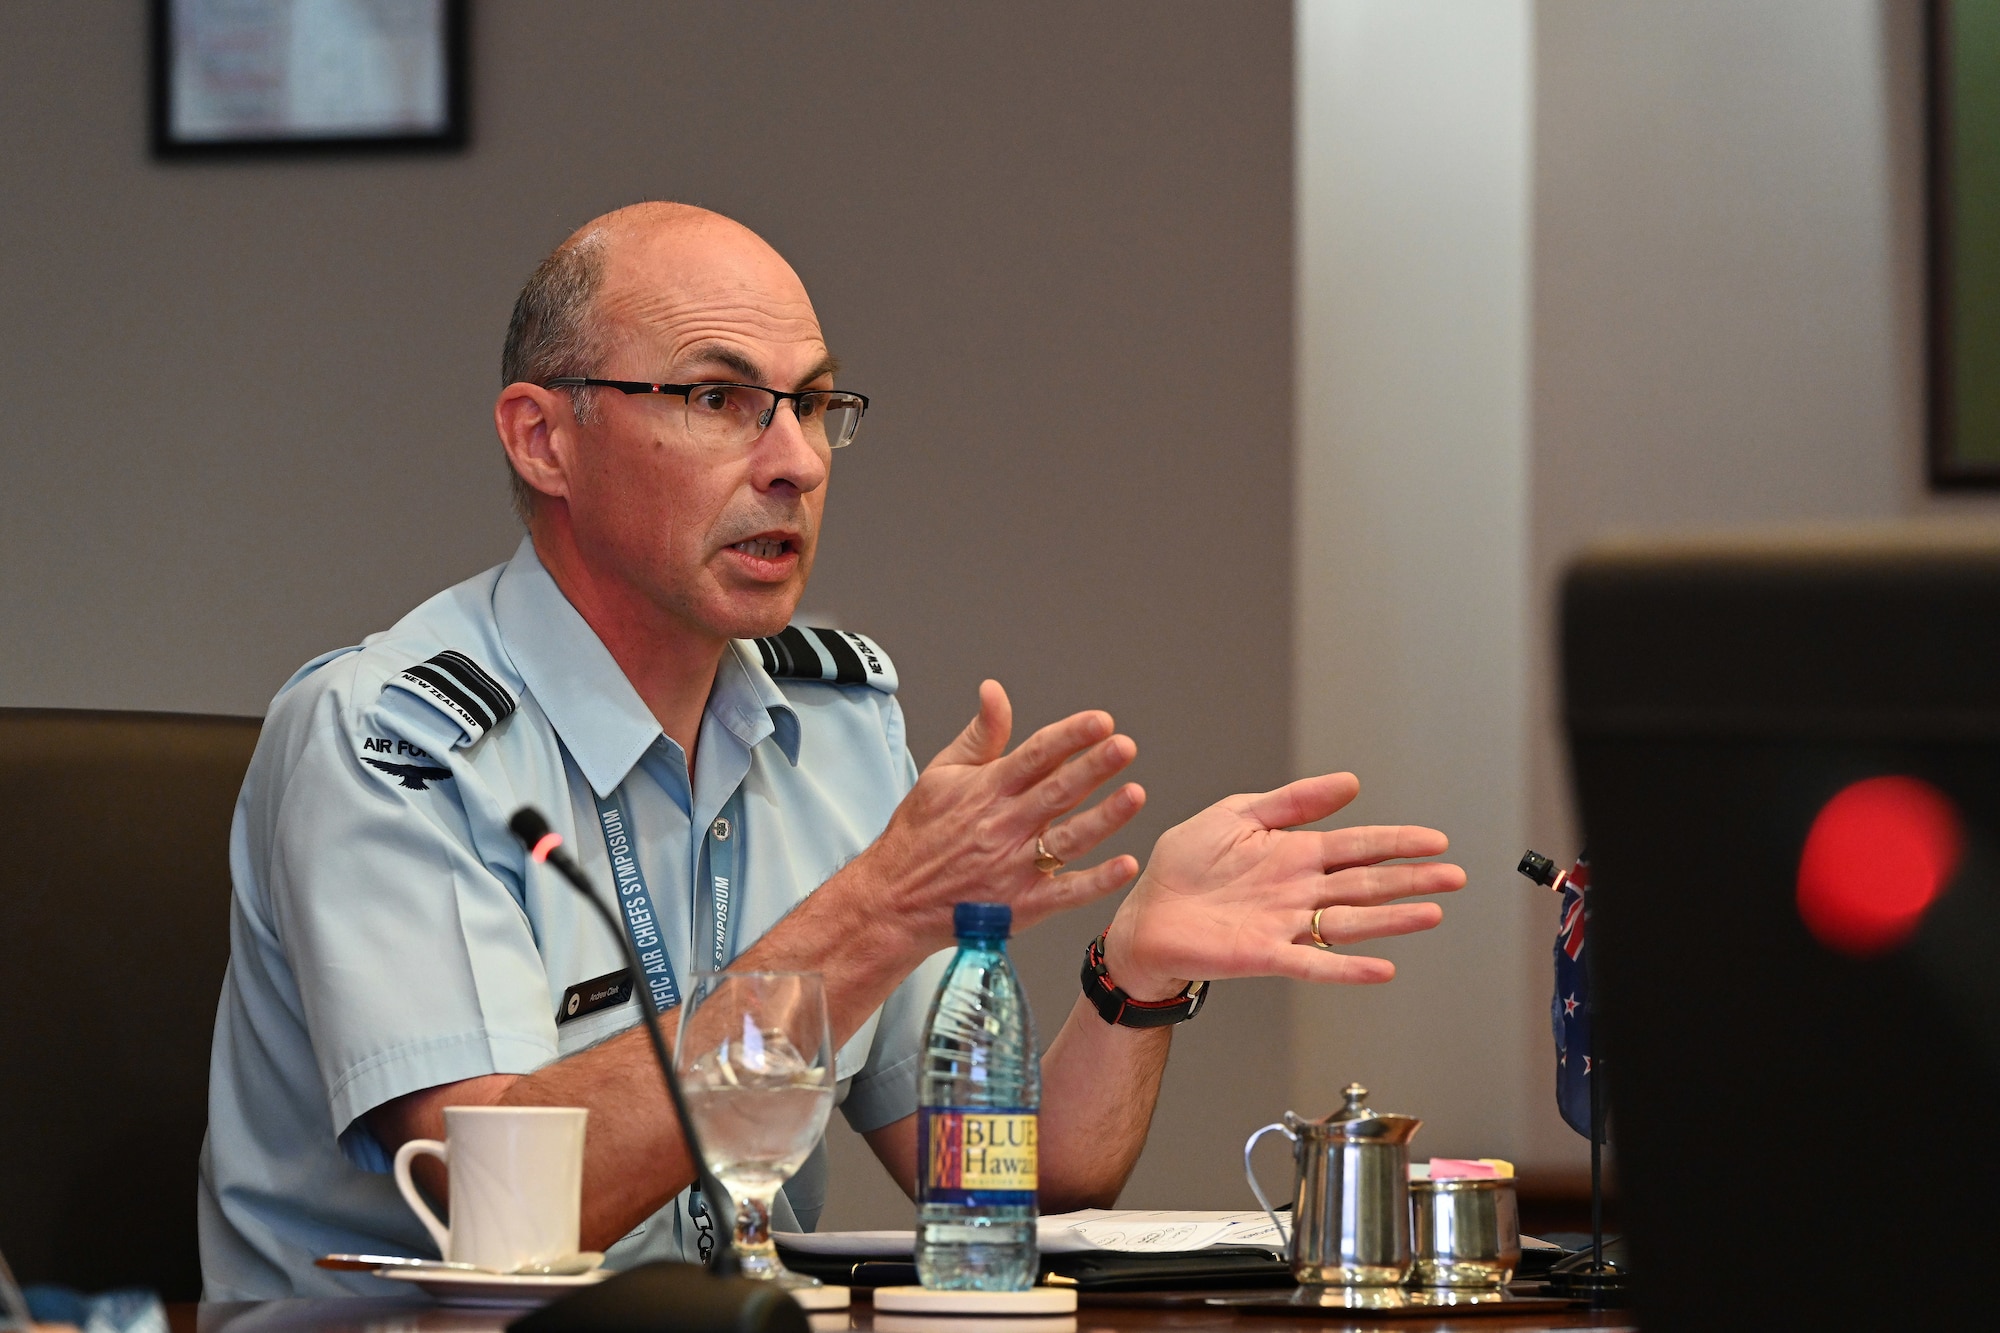 Photo of a leader from the Royal New Zealand Air Force speaking.